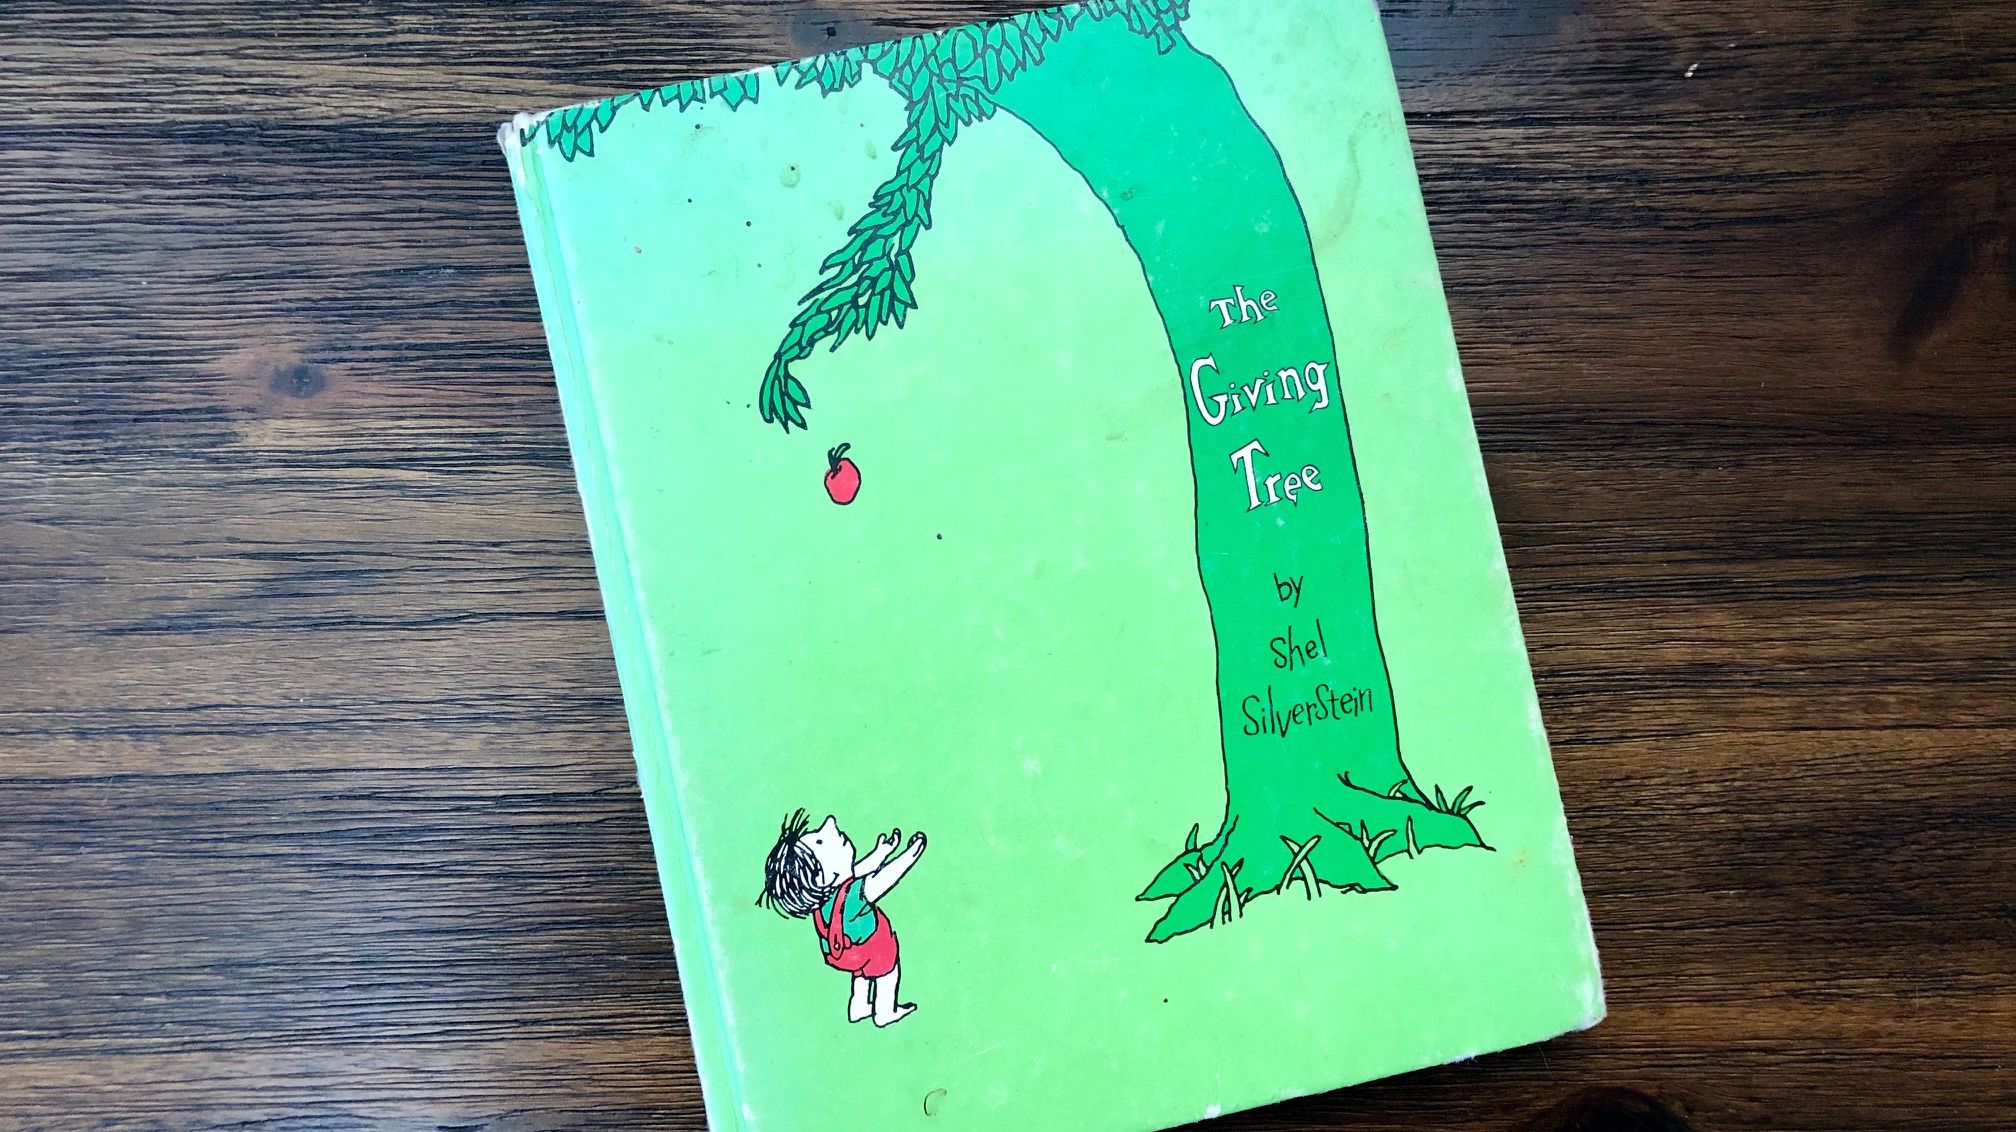 7 Surprising Facts About The Giving Tree Mental Floss 4168